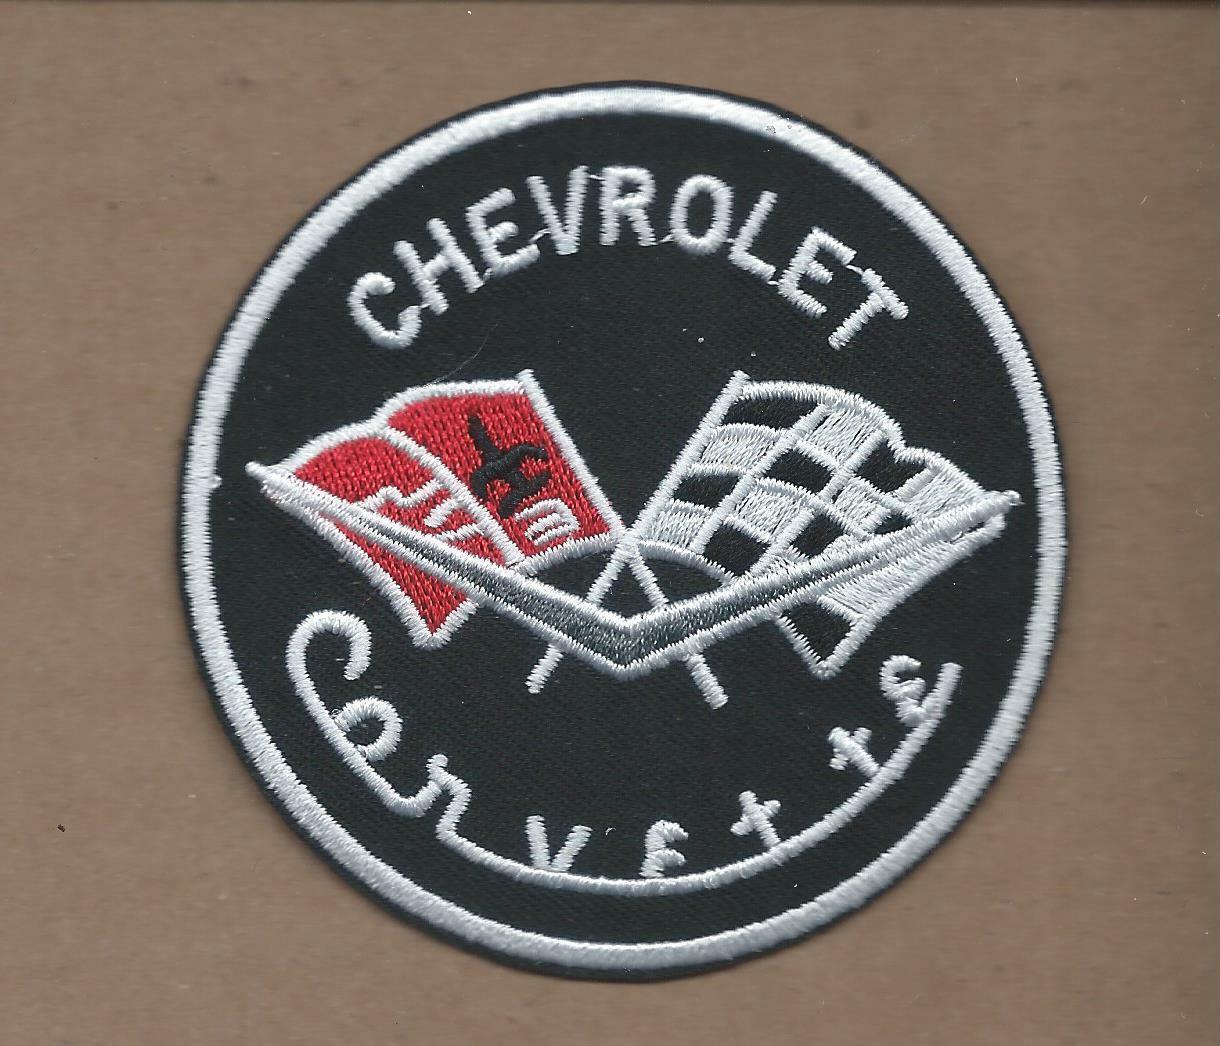 NEW 3 INCH CHEVROLET CORVETTE IRON ON PATCH  P1